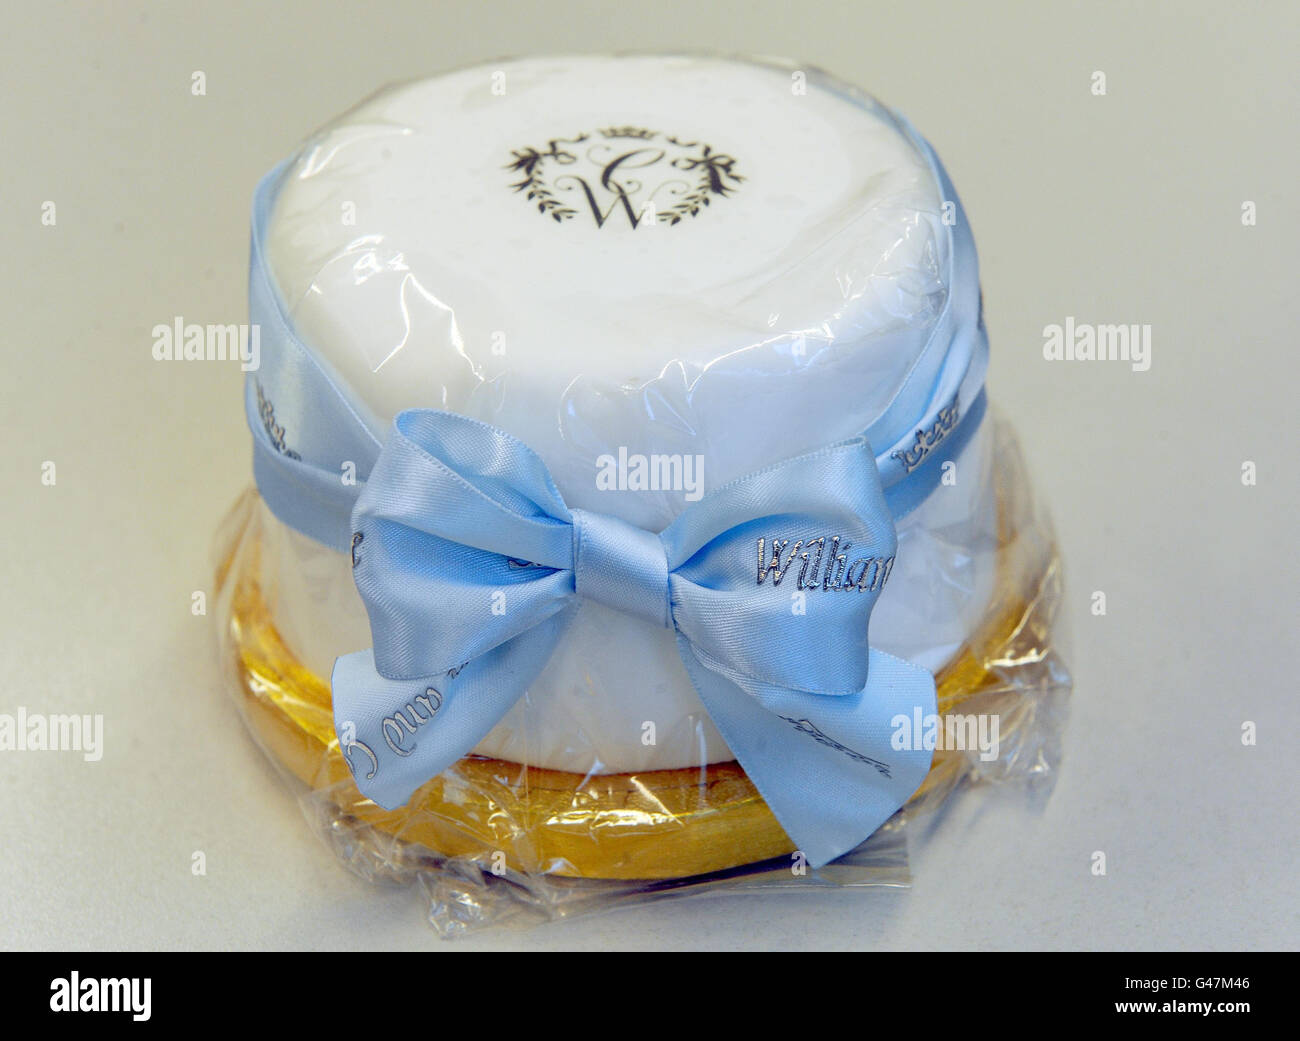 A Royal Wedding souvenir cake from the Royal Collection purchased from Buckingham Palace gift shop, London Stock Photo